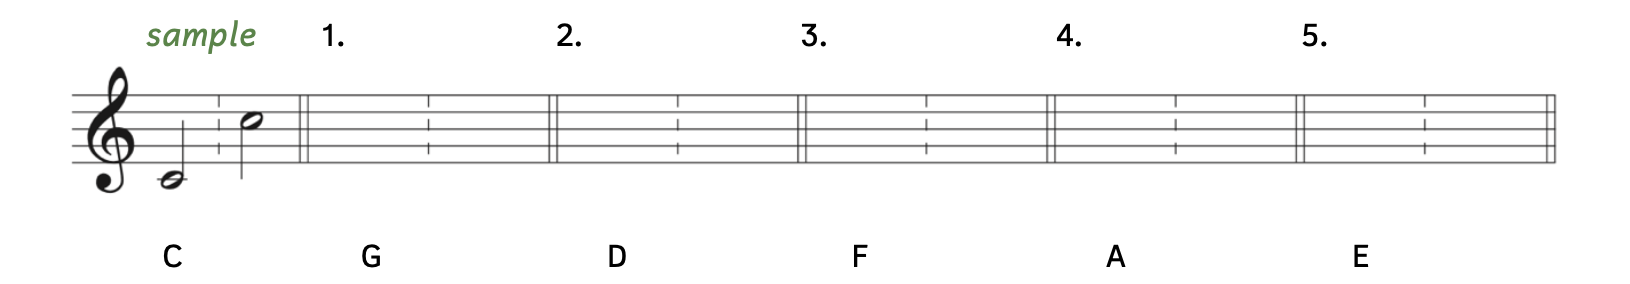 An exercise that asks you to write pitches in treble clef with both a stem pointing up and a stem pointing down. The sample asks for C. The first C is written on the ledger line below the staff with a stem pointing up. The second C is written in the third space with a stem pointing down. Number 1 asks for G. Number 2 asks for D. Number 3 asks for F. Number 4 asks for A. Number 5 asks for E.